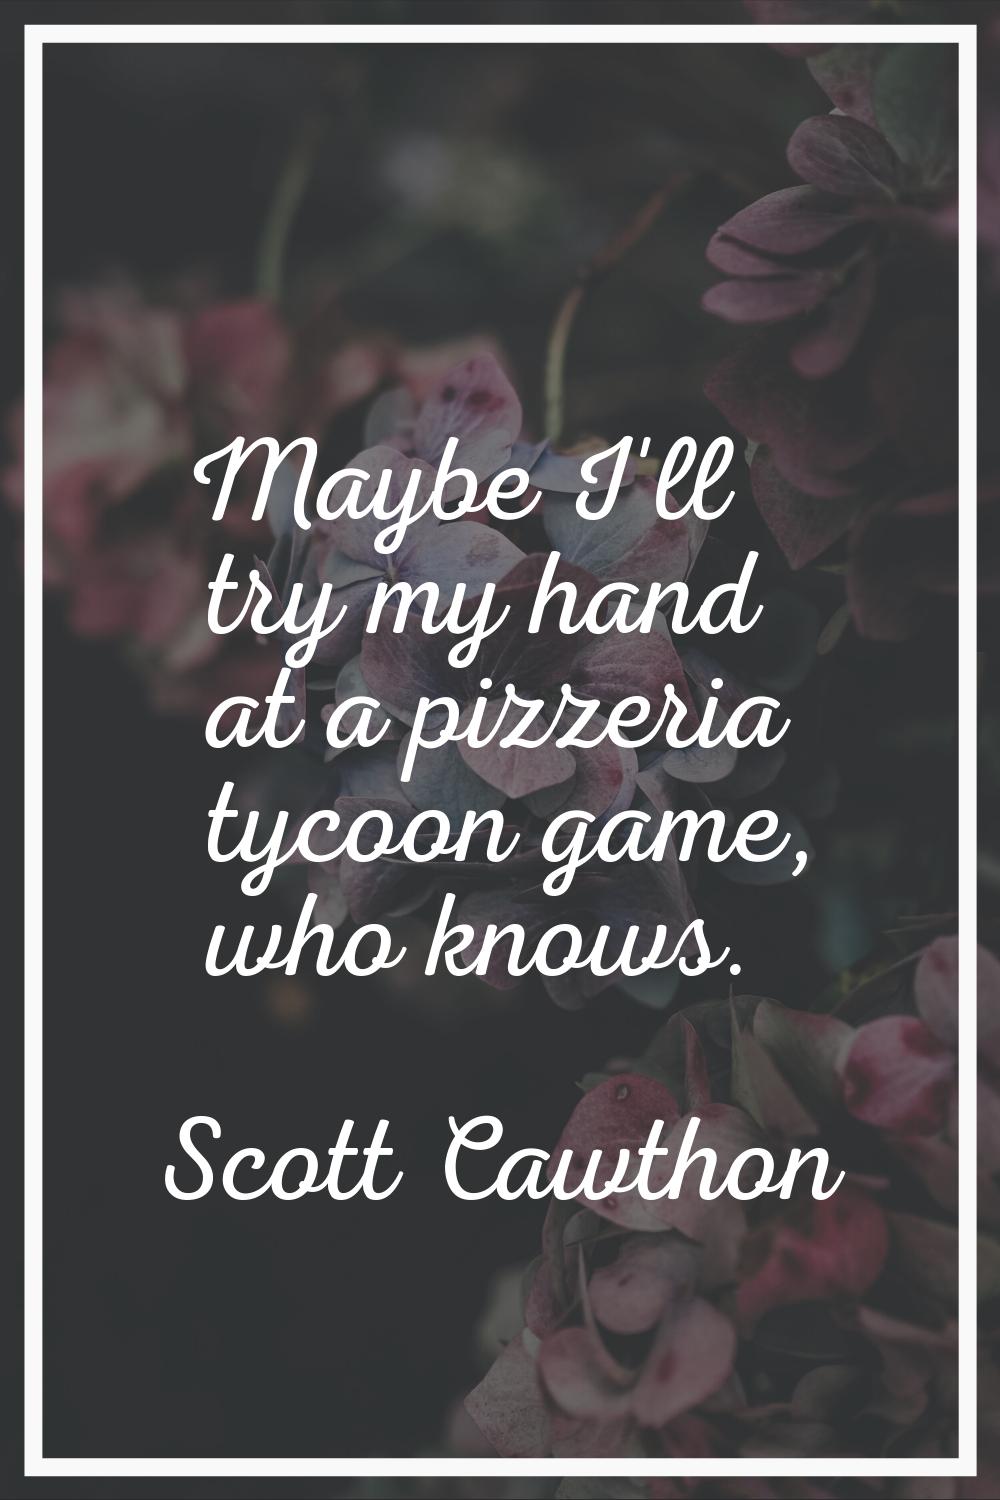 Maybe I'll try my hand at a pizzeria tycoon game, who knows.